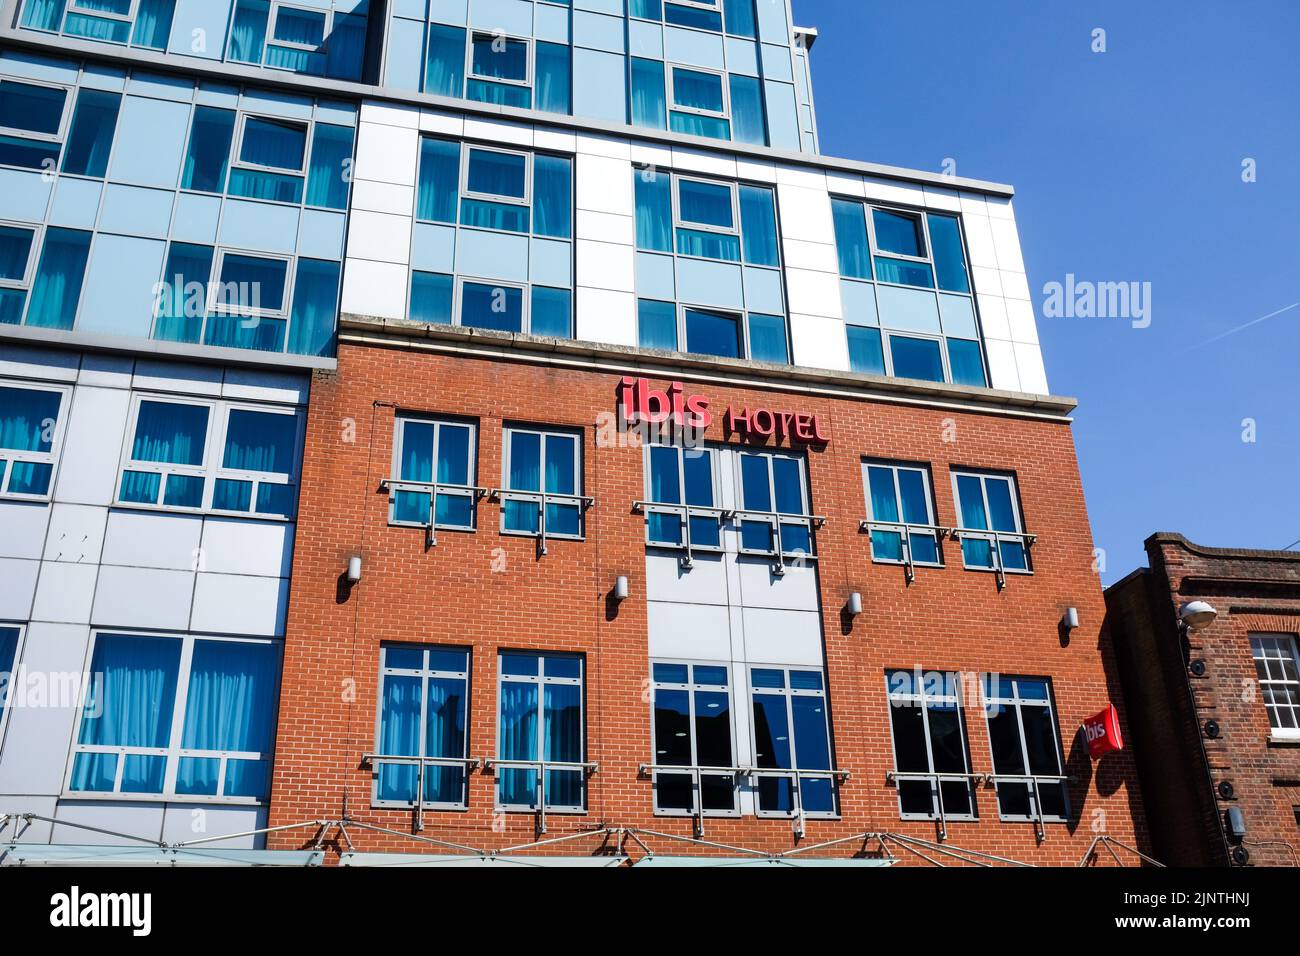 An Ibis hotel in Reading, Berkshire, England. Stock Photo